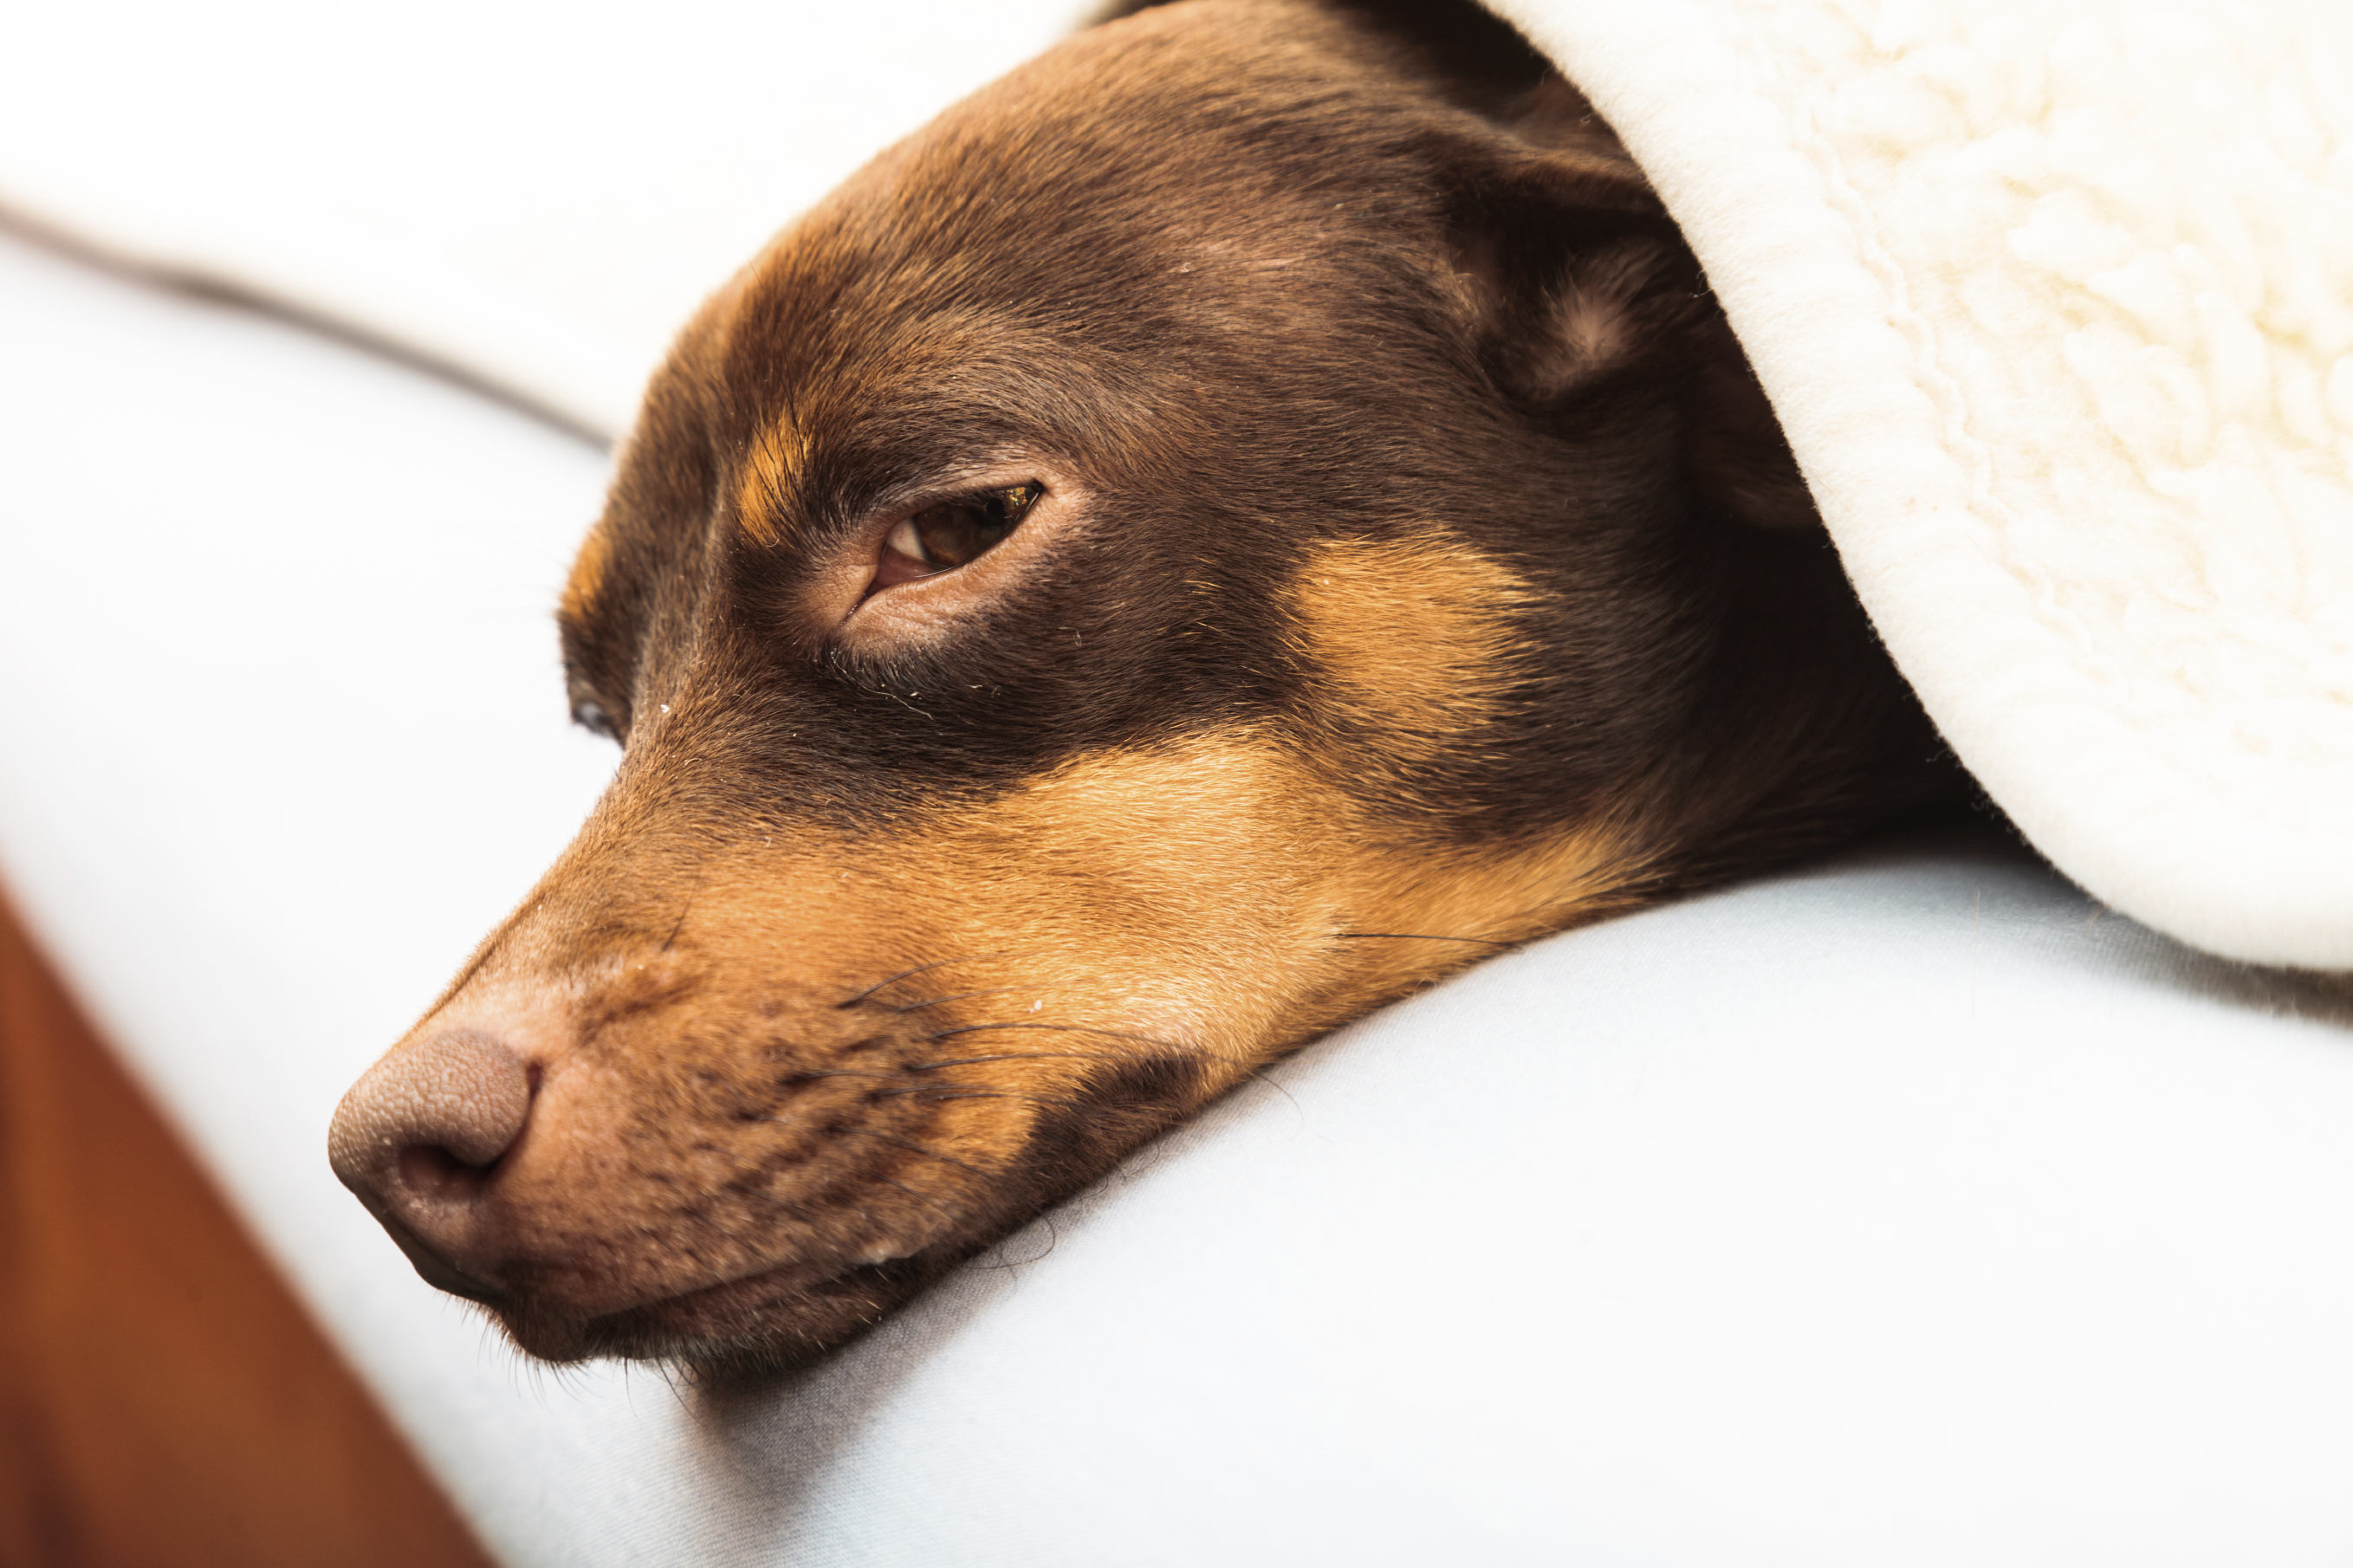 what causes urinary tract infections in dogs